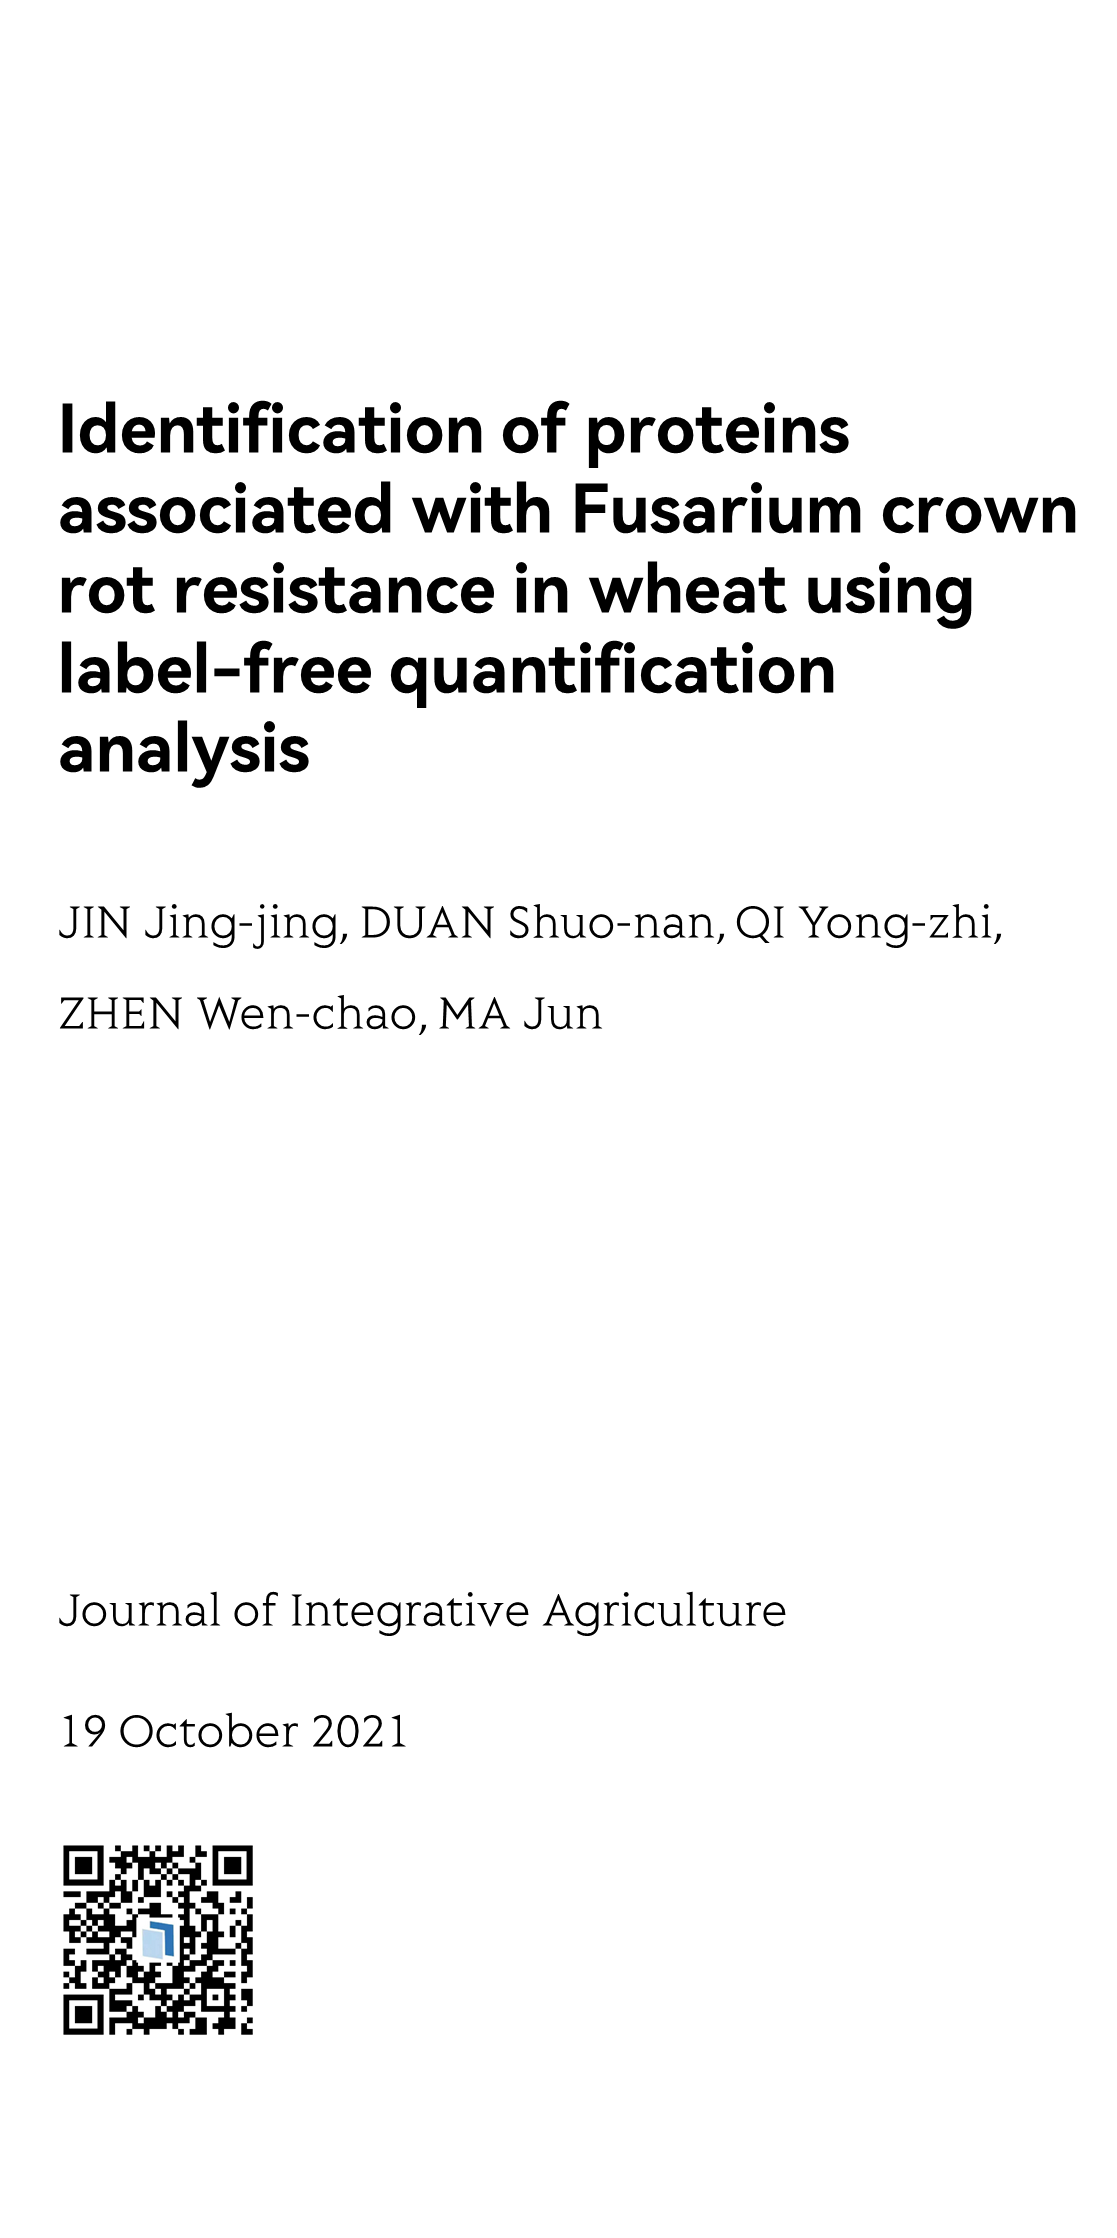 Identification of proteins associated with Fusarium crown rot resistance in wheat using label-free quantification analysis_1